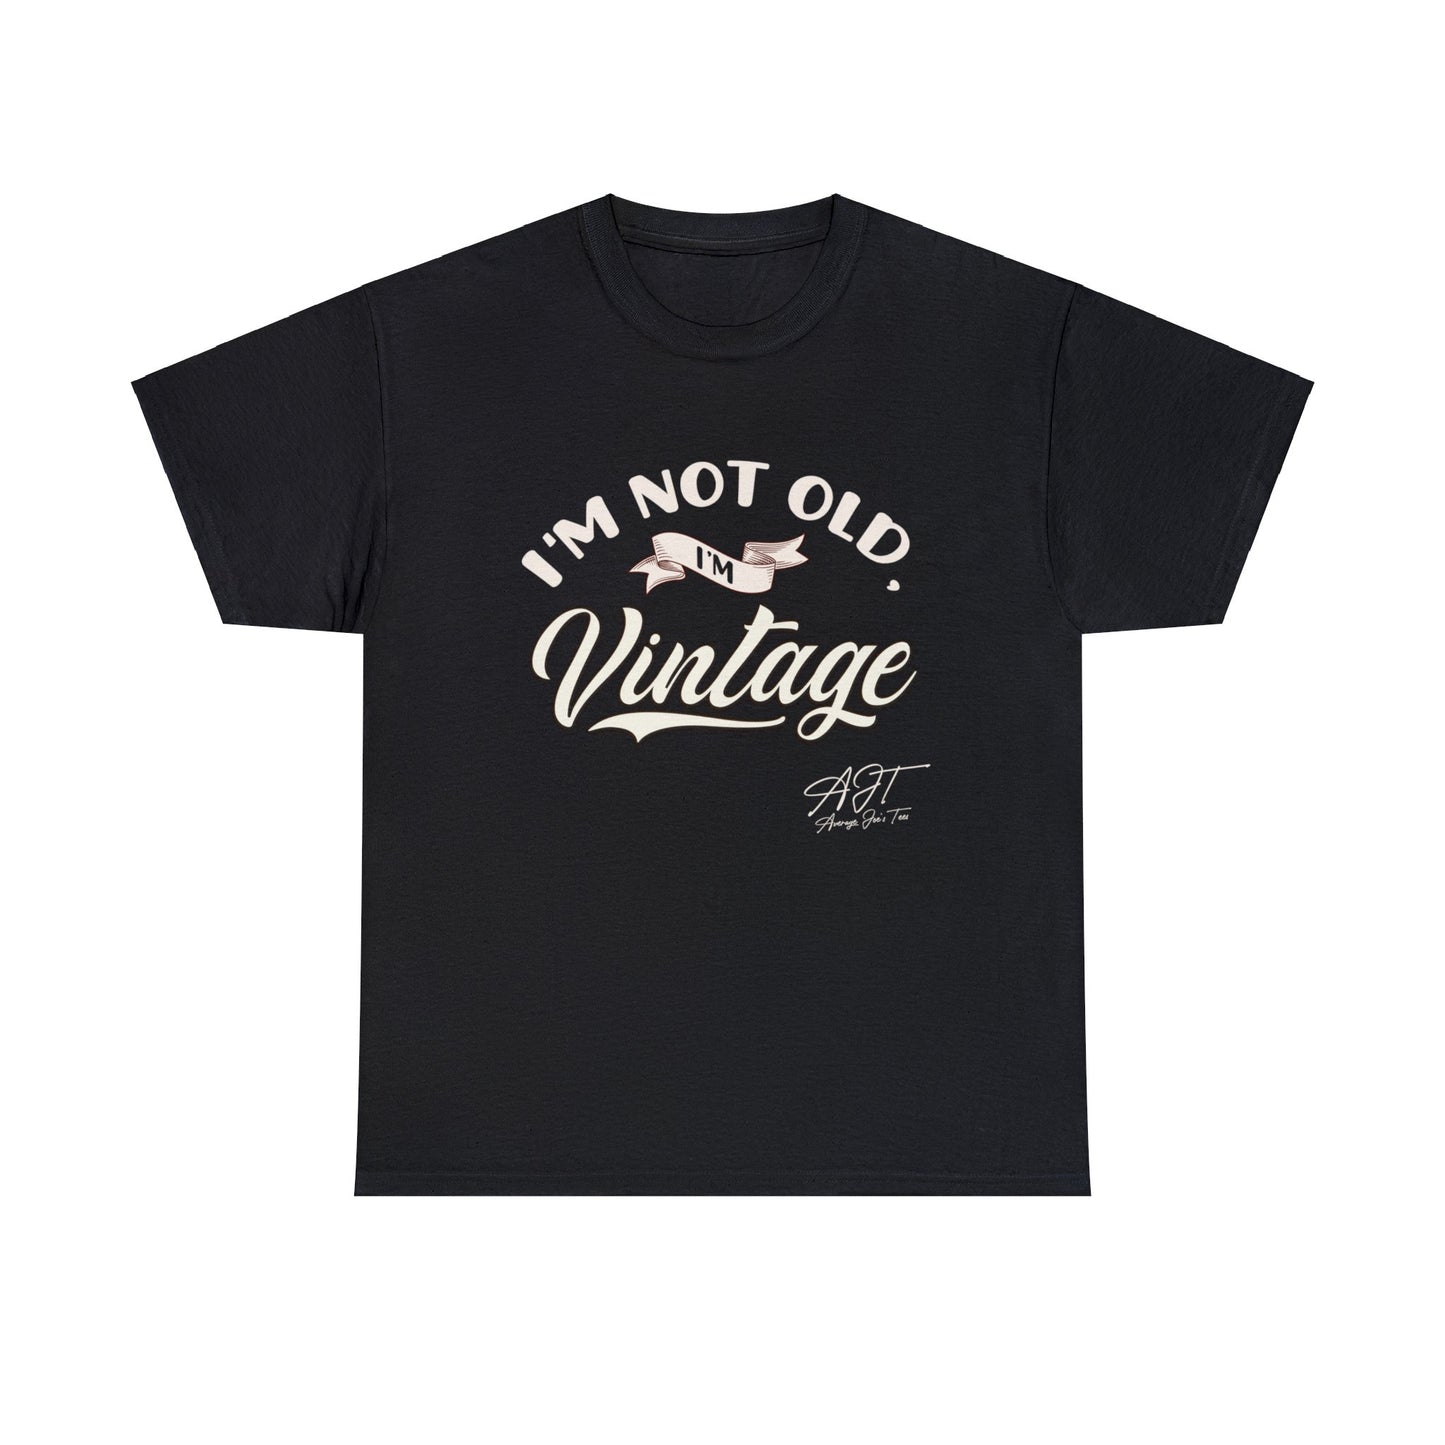 "I'm Not Old" Cotton Tee